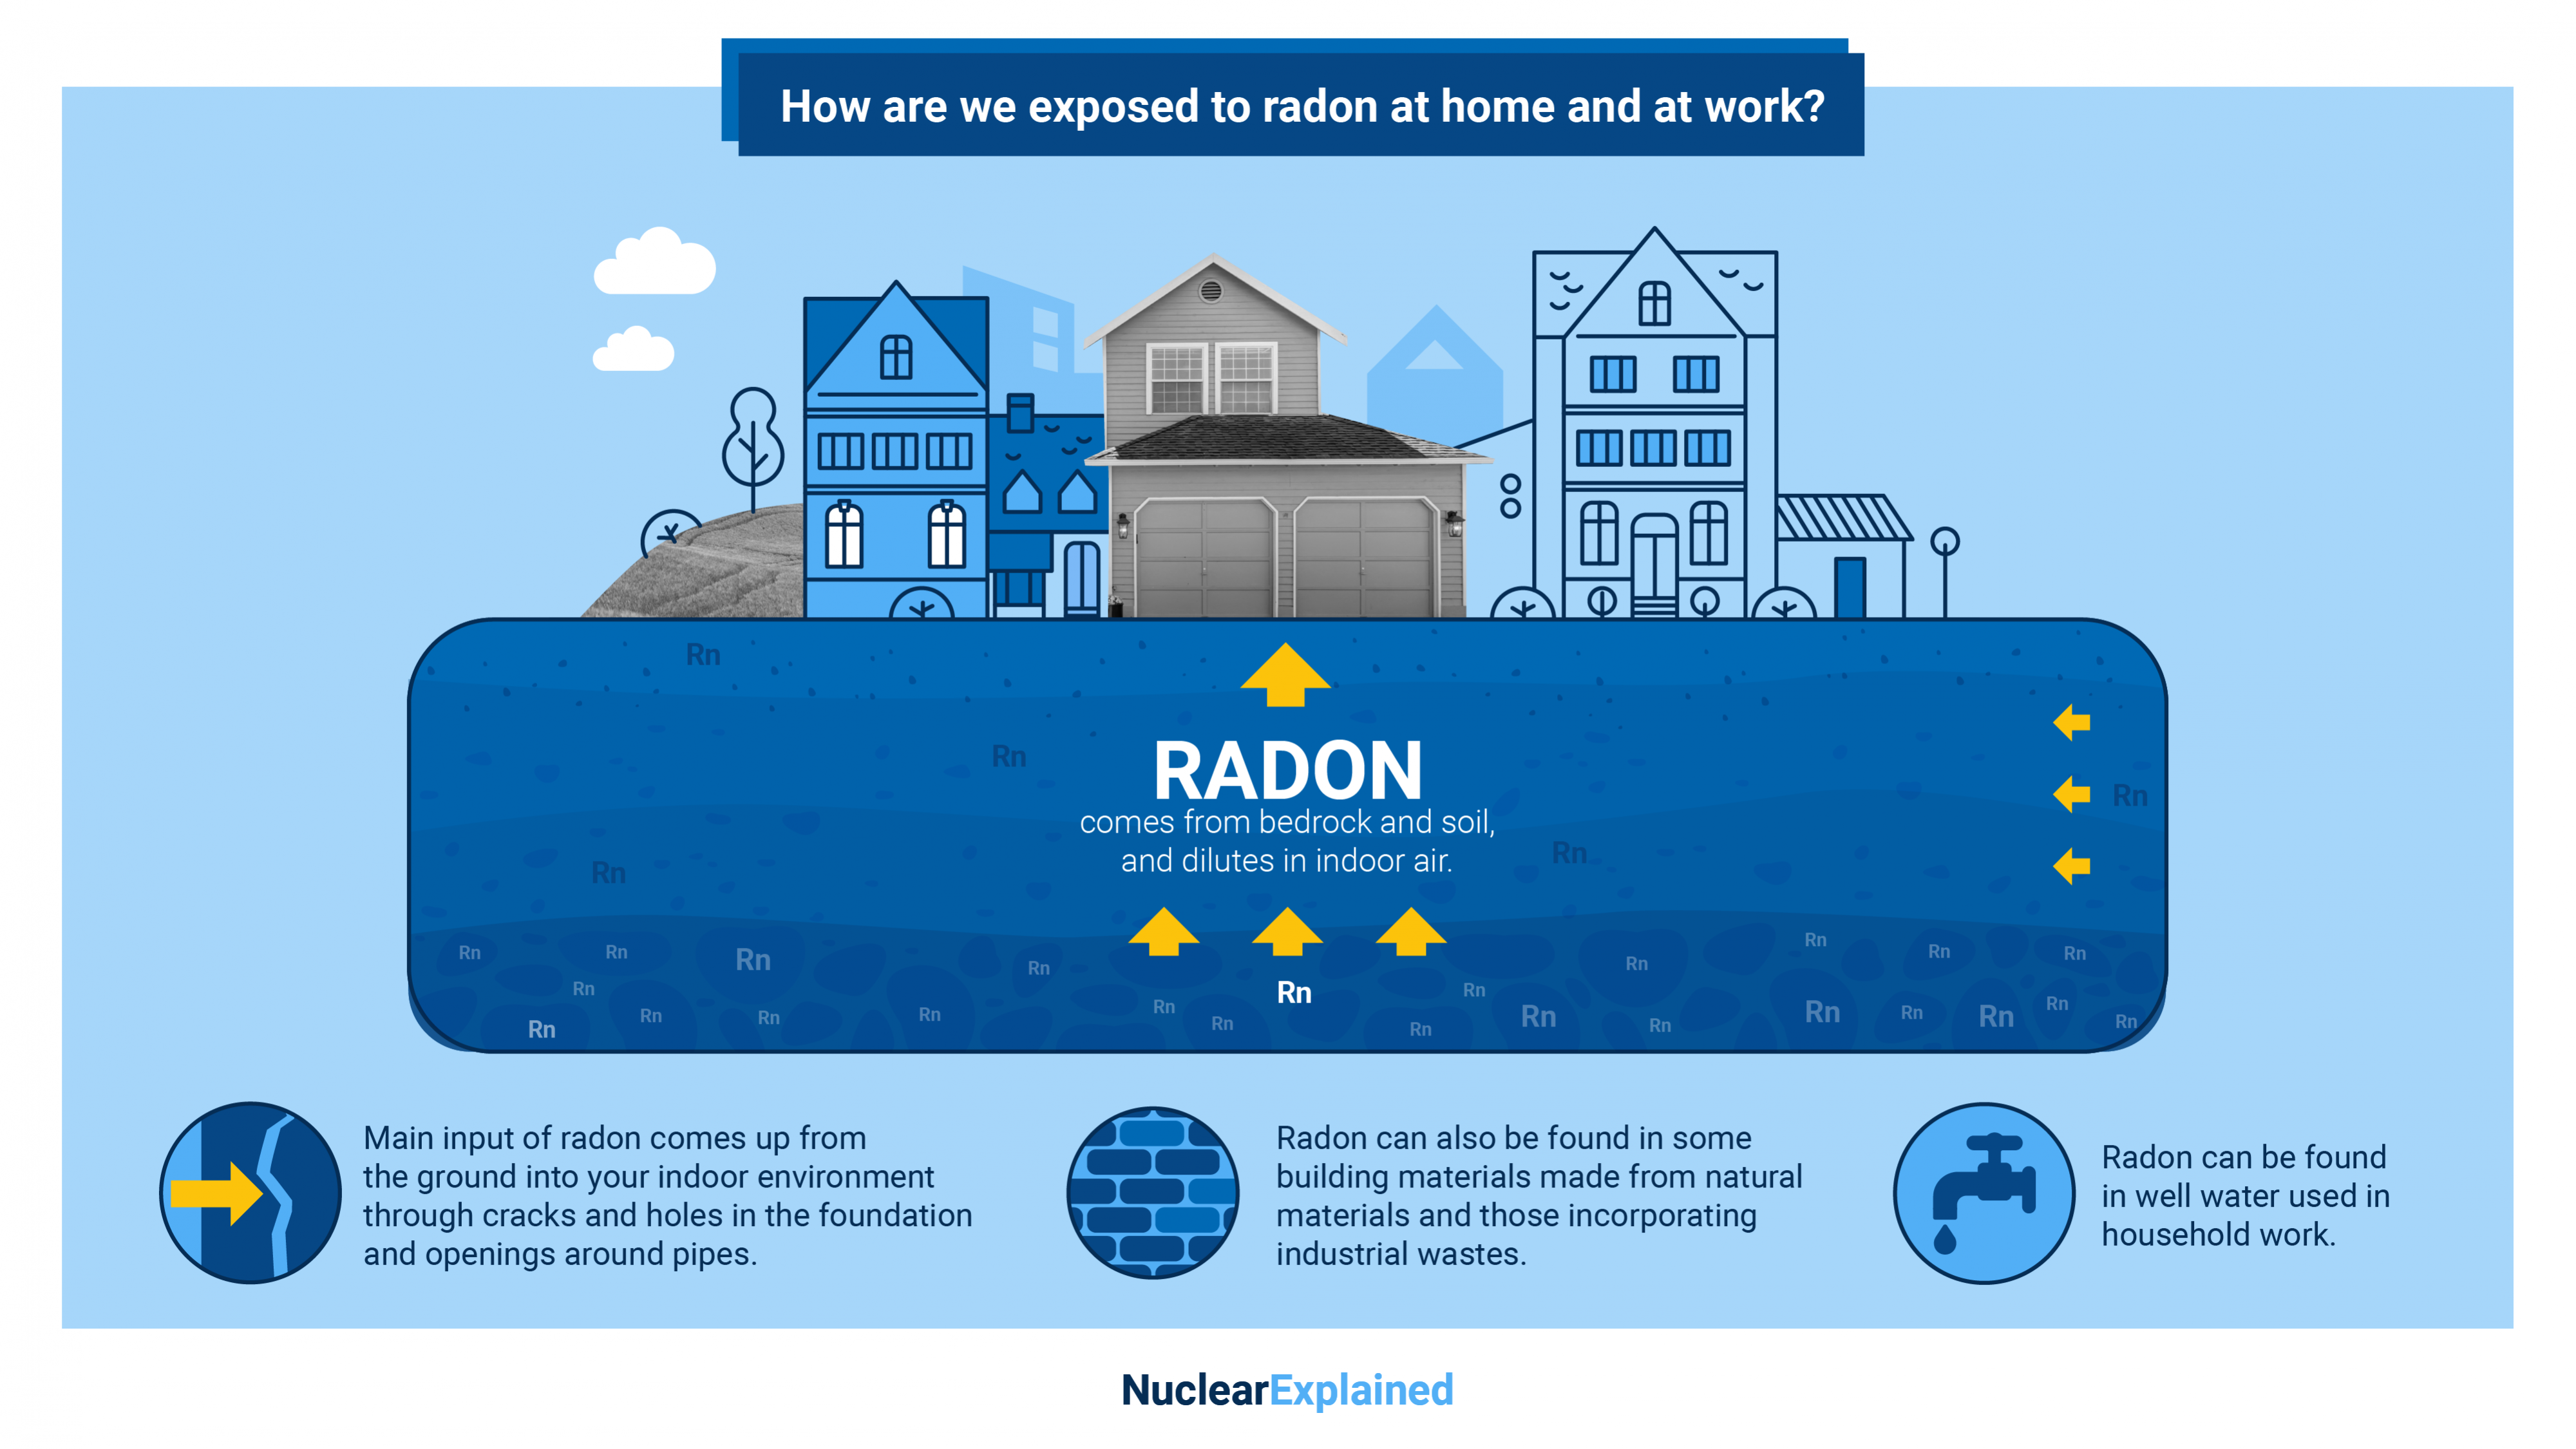 Everything About Getting a Radon Inspection: Cost Factors and